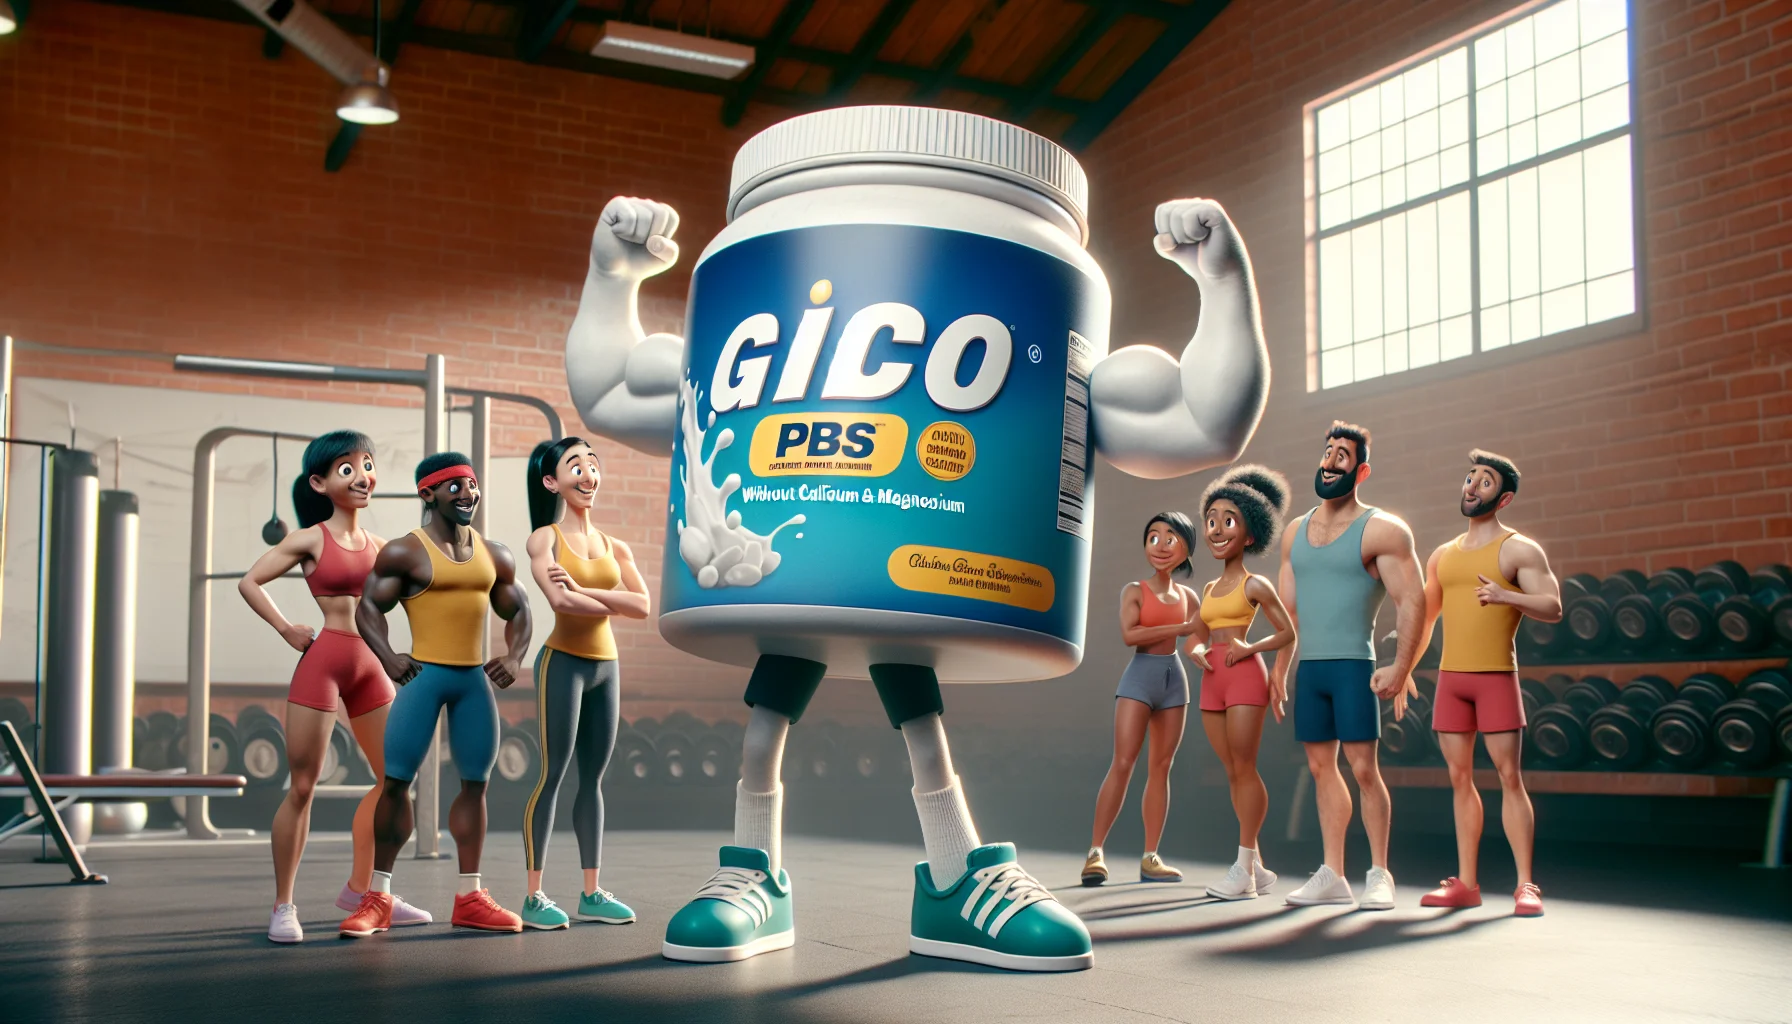 Imagine a whimsical and humorous scene set in a gym. There's a large, animated container of 'Gibco PBS Without Calcium and Magnesium', anthropomorphized with flexing arms and a sweatband, promoting the benefits of supplements for sports. In the background, there are diverse athletes of both genders: a Hispanic female weightlifter, an Asian male gymnast, a Caucasian male runner, and a Black female yoga practitioner. They look at the container with surprise and interest. The atmosphere is uplifting and promotes the idea of sports nutrition in a fun way.